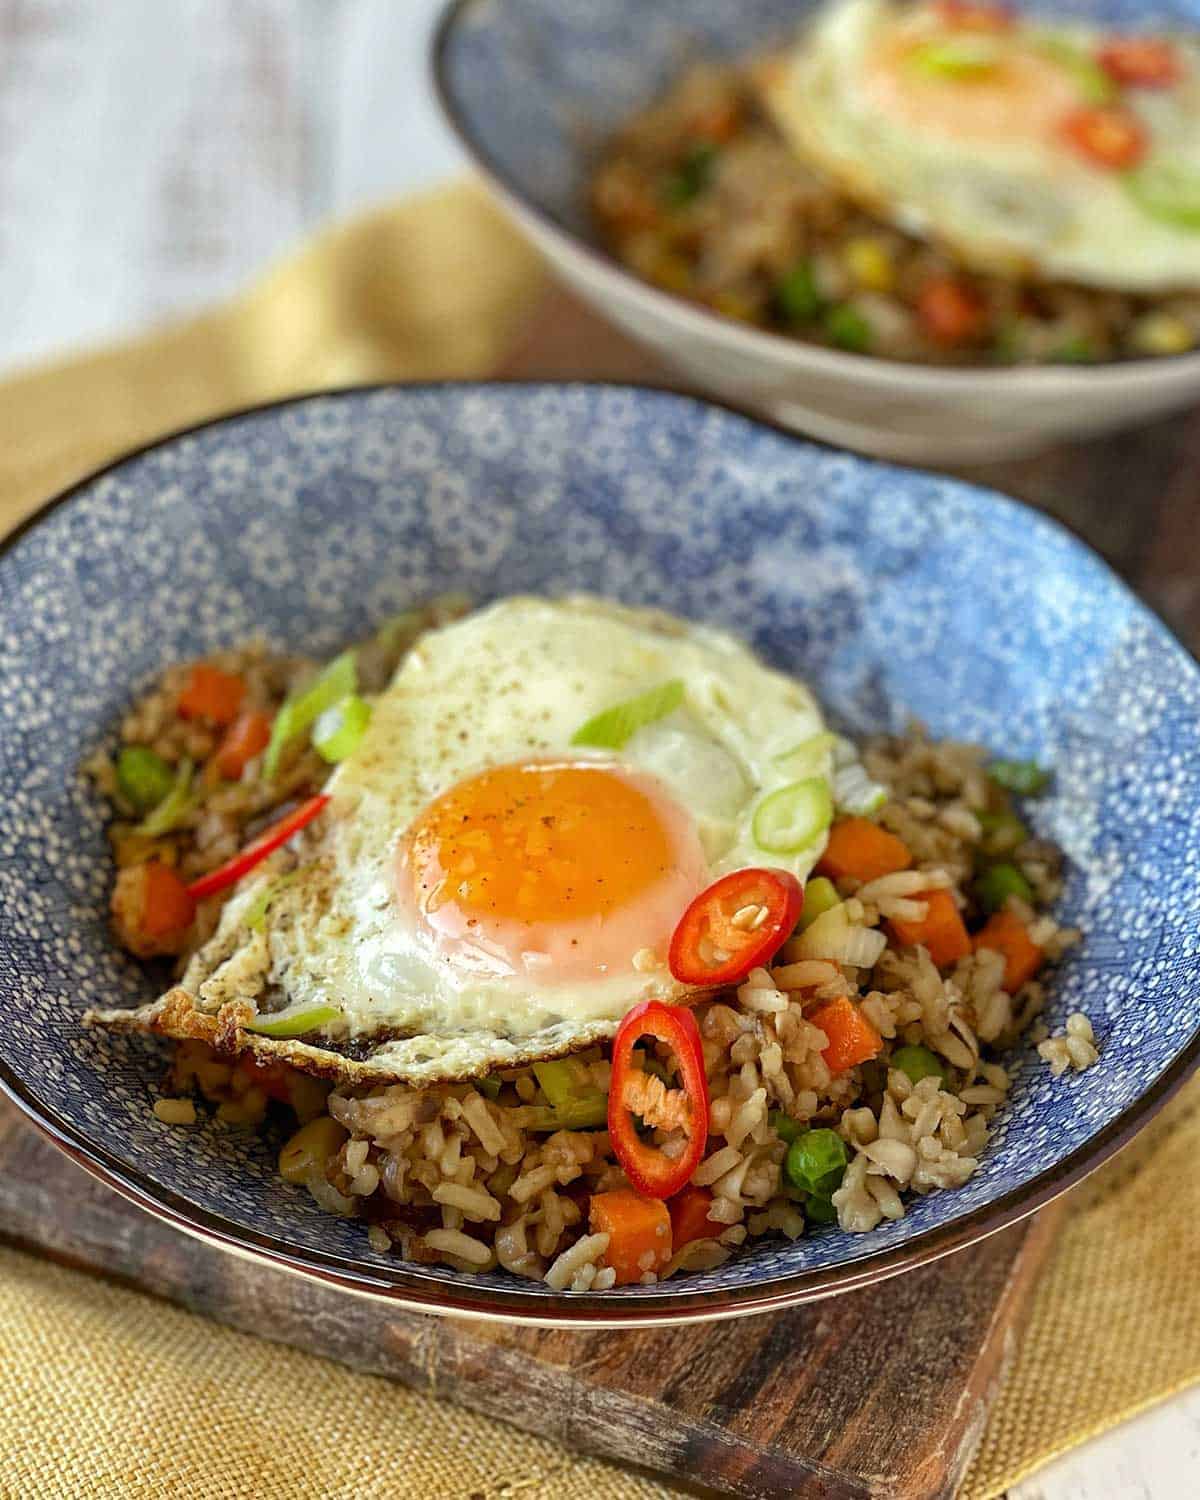 Mushroom Fried Rice in a blue bowl on a wooden board